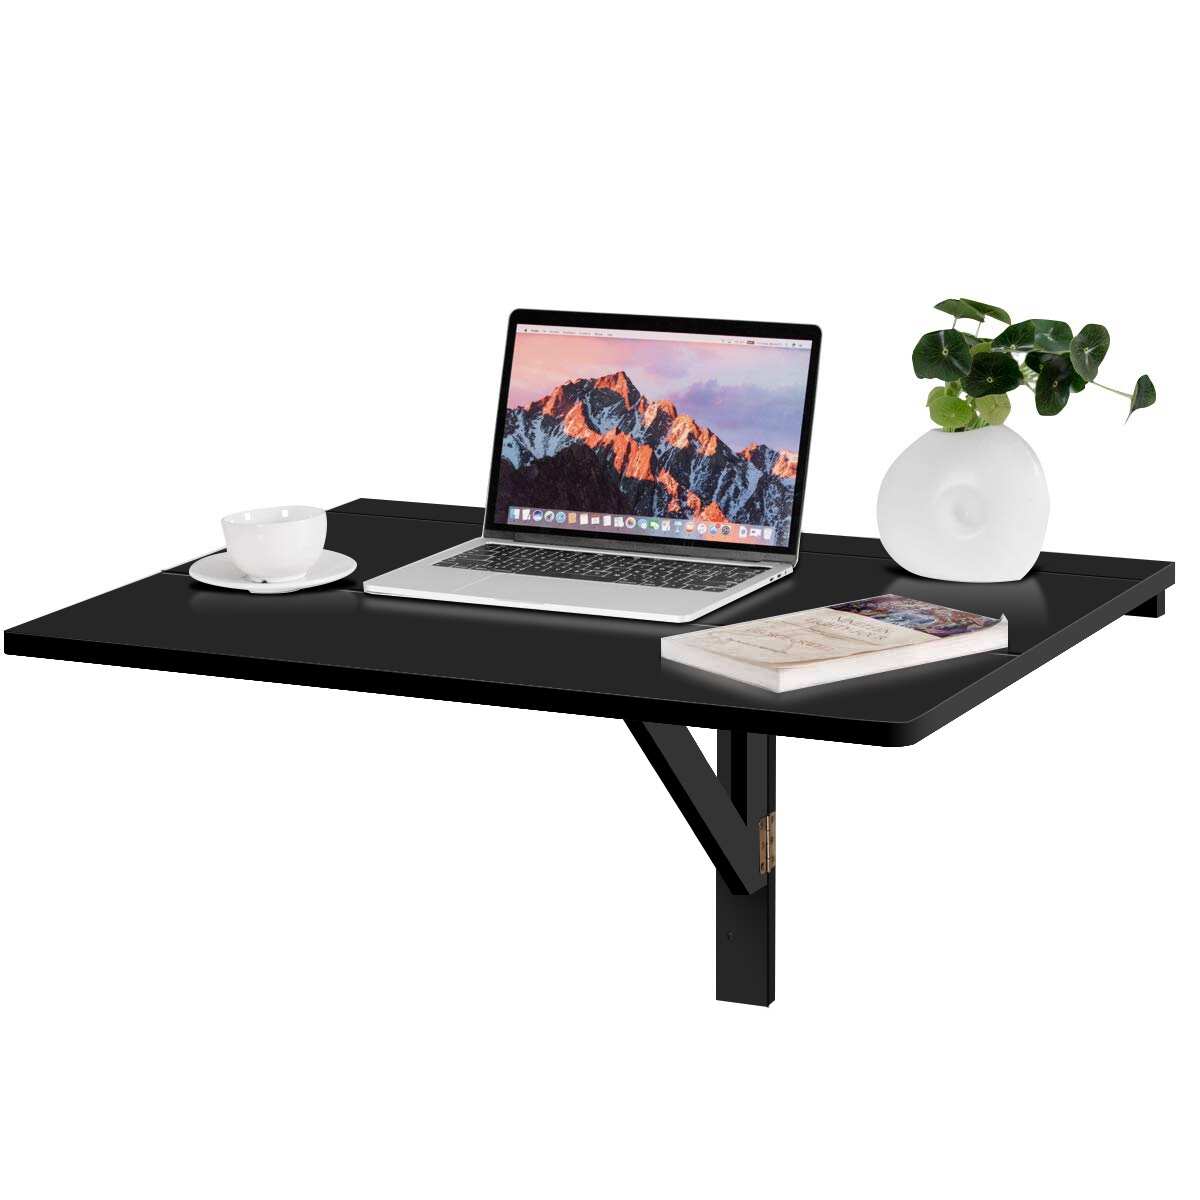 Gymax Wall-Mounted Drop-Leaf Table Floating Folding Desk Space Saver